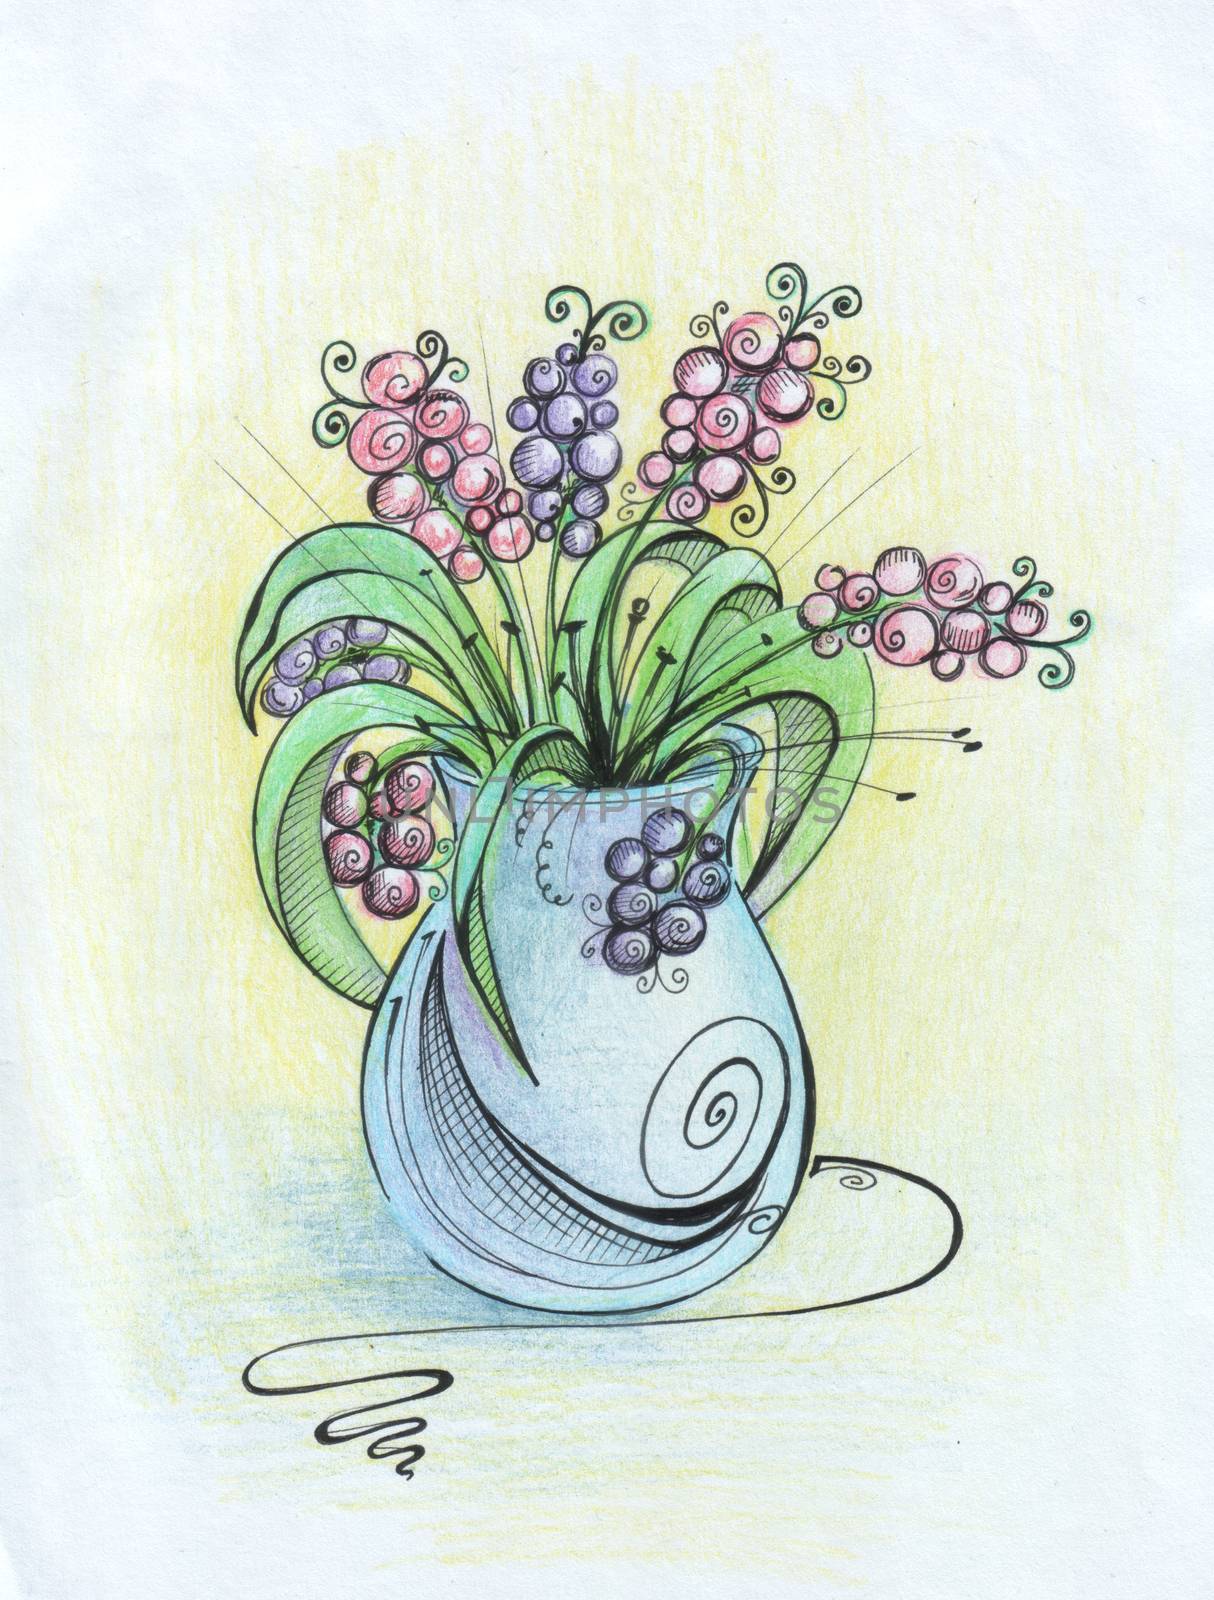 Still life - a vase of flowers painted pencil by Madhourse